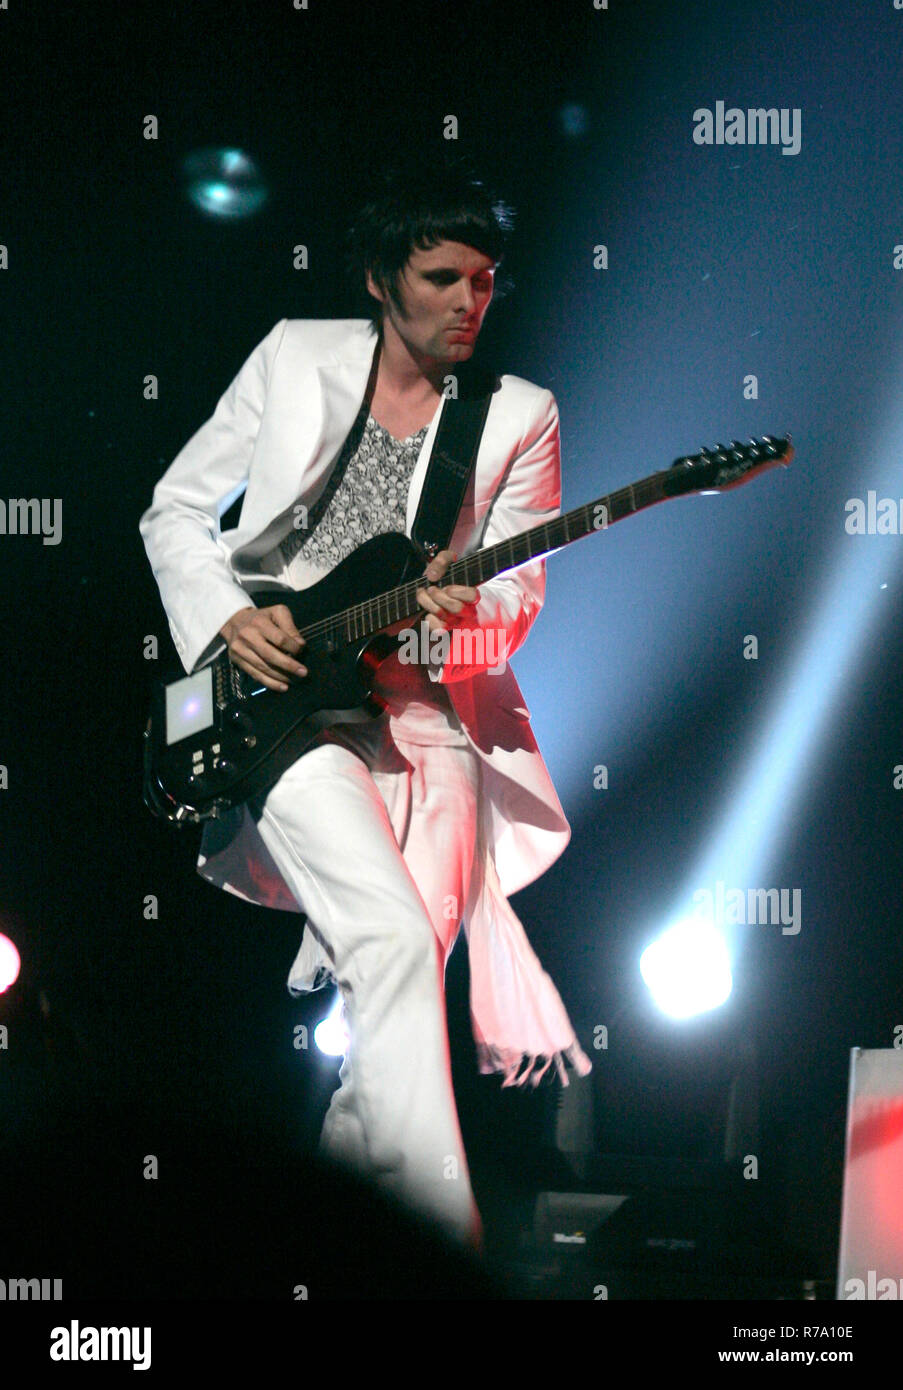 Matthew Bellamy with Muse performs in concert at the Bank Atlantic Center in Sunrise, Florida on April 22, 2007. Stock Photo